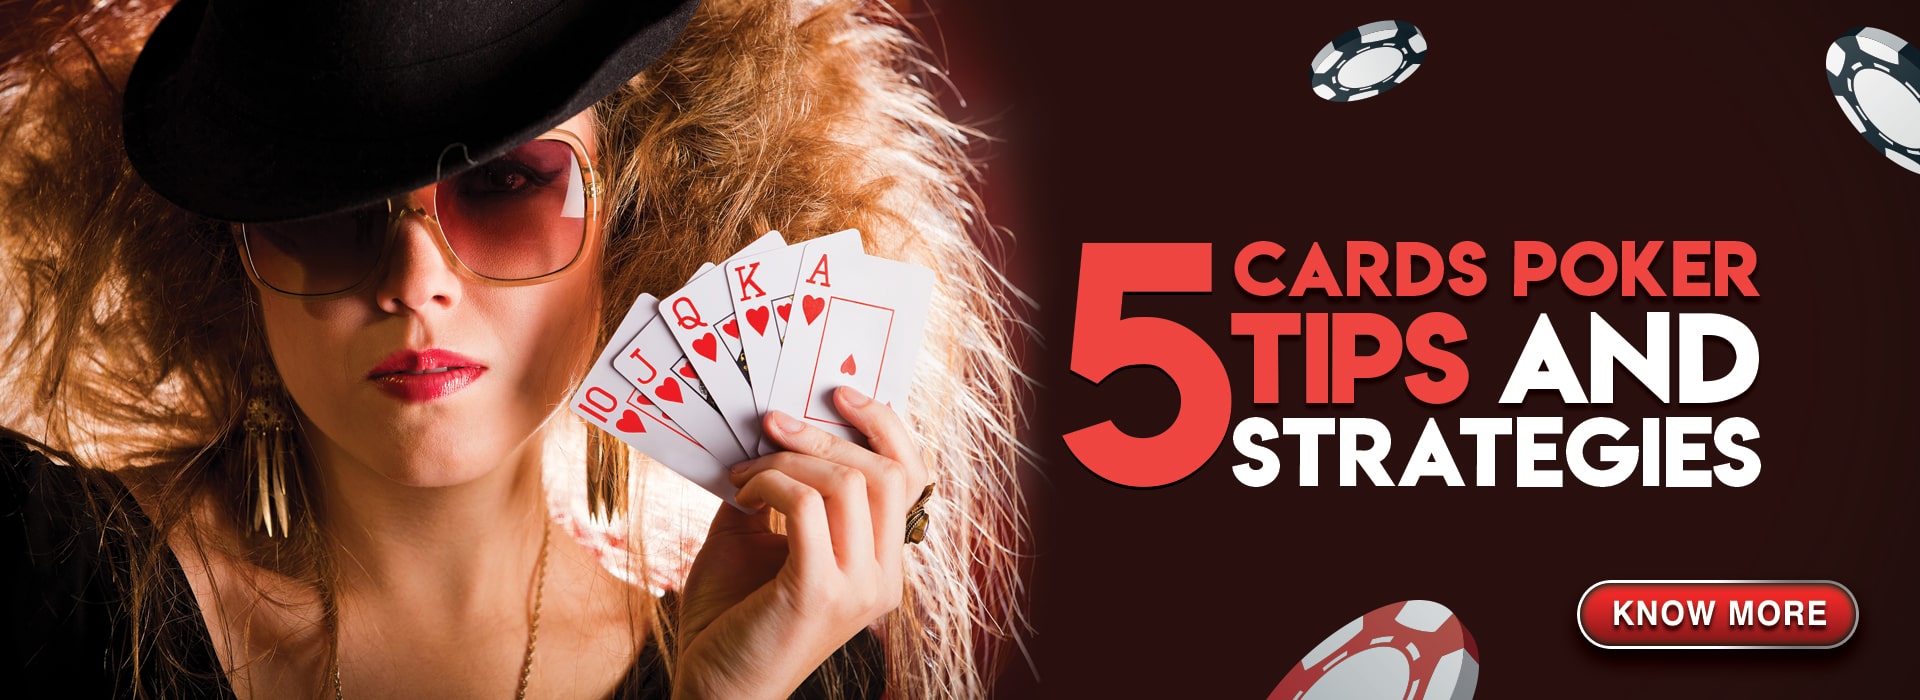 5 Card Poker Tips And Strategies